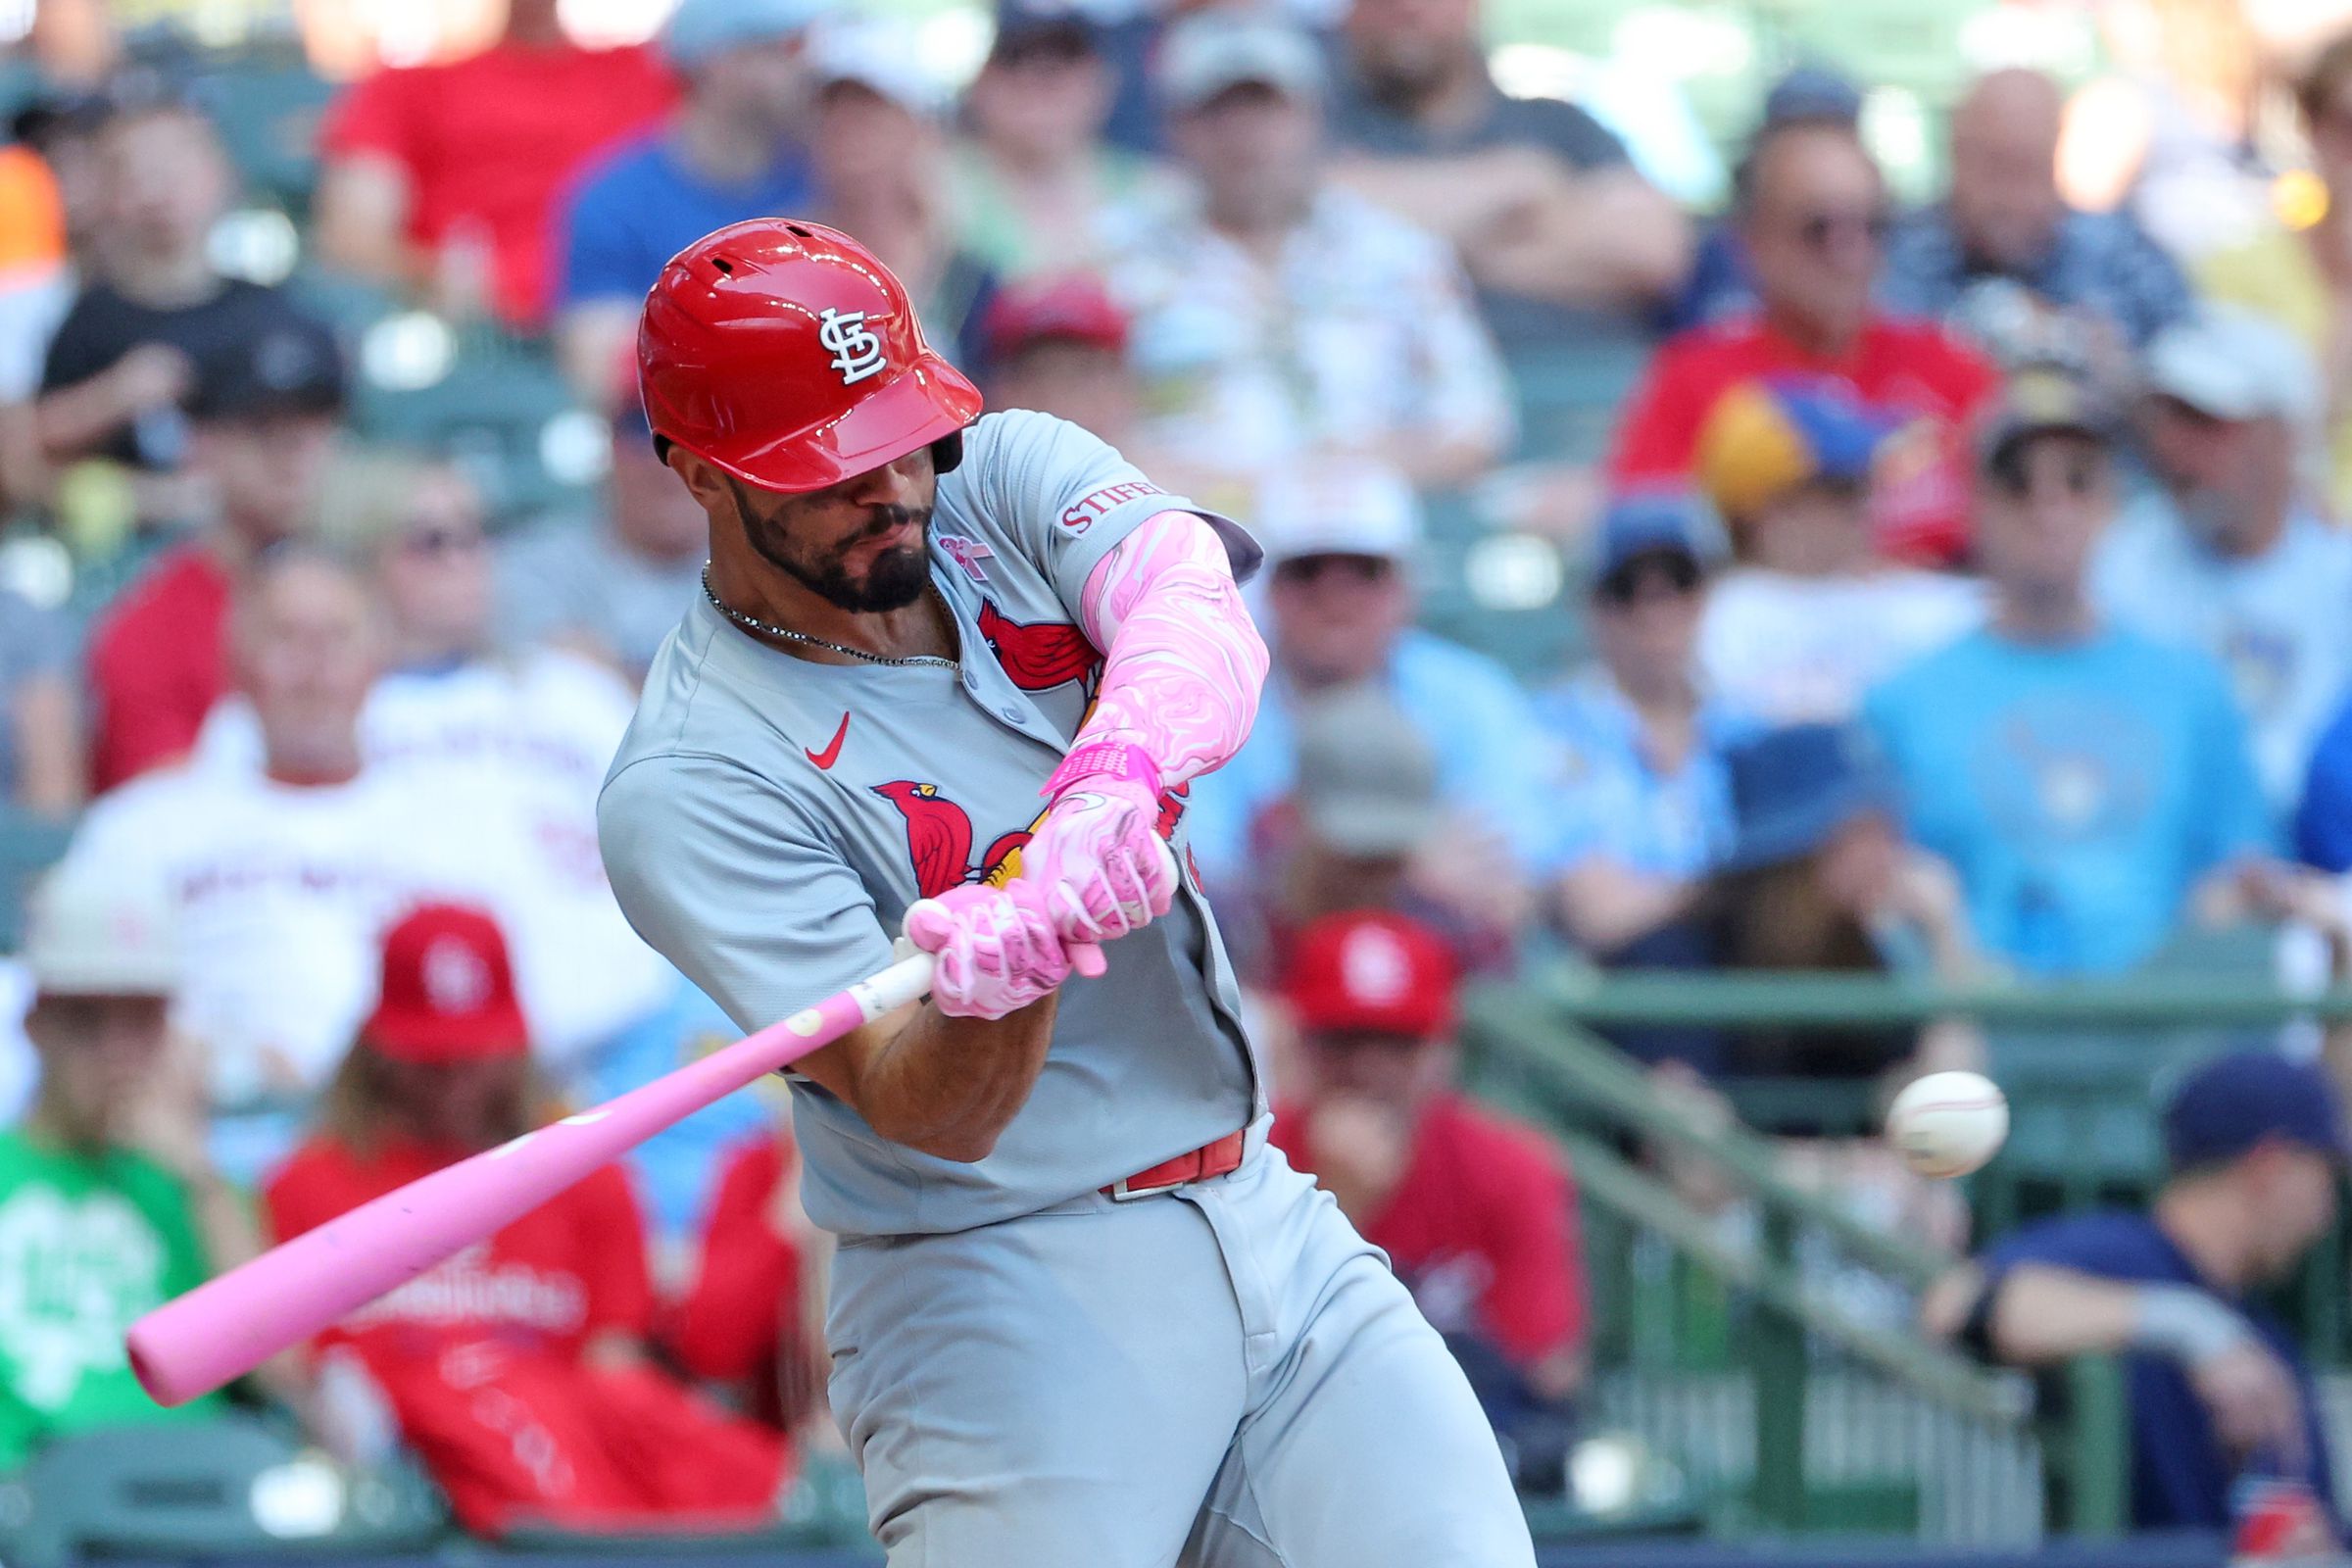 A photo showing Iván Herrera at bat during the St. Louis Cardinals vs Milwaukee Brewers game.